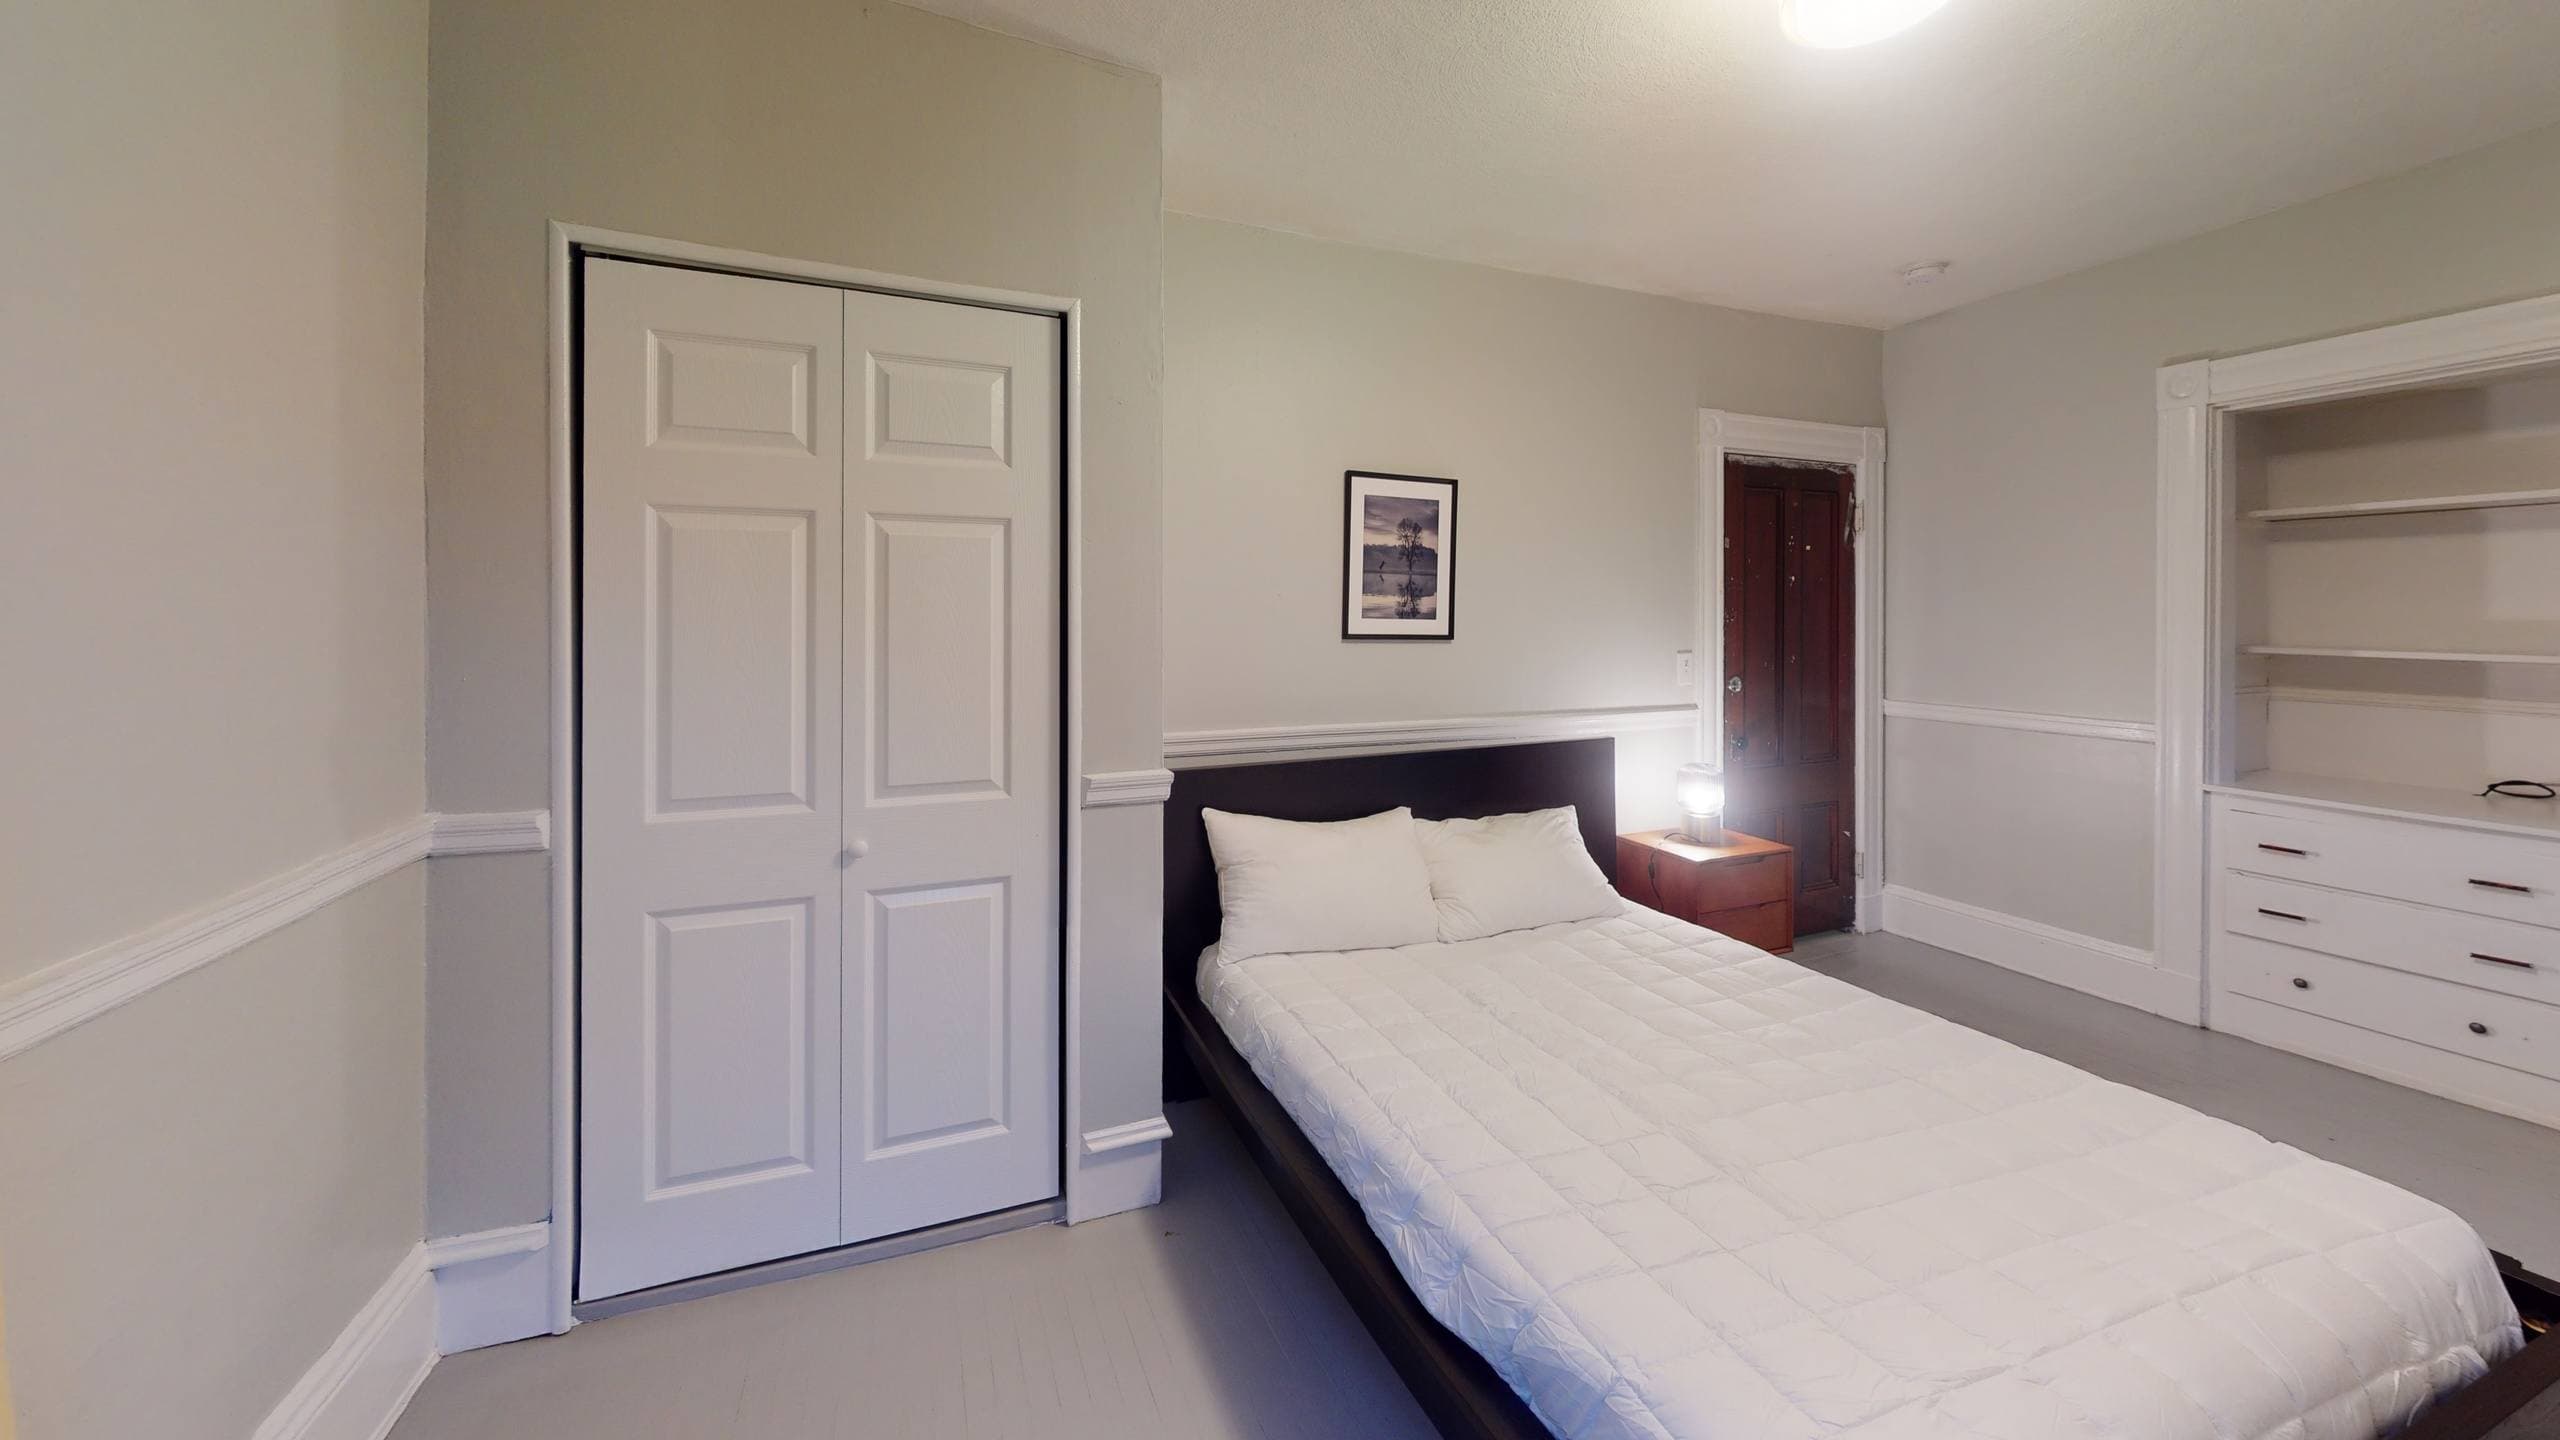 Photo 16 of #1359: Queen Bedroom A at June Homes